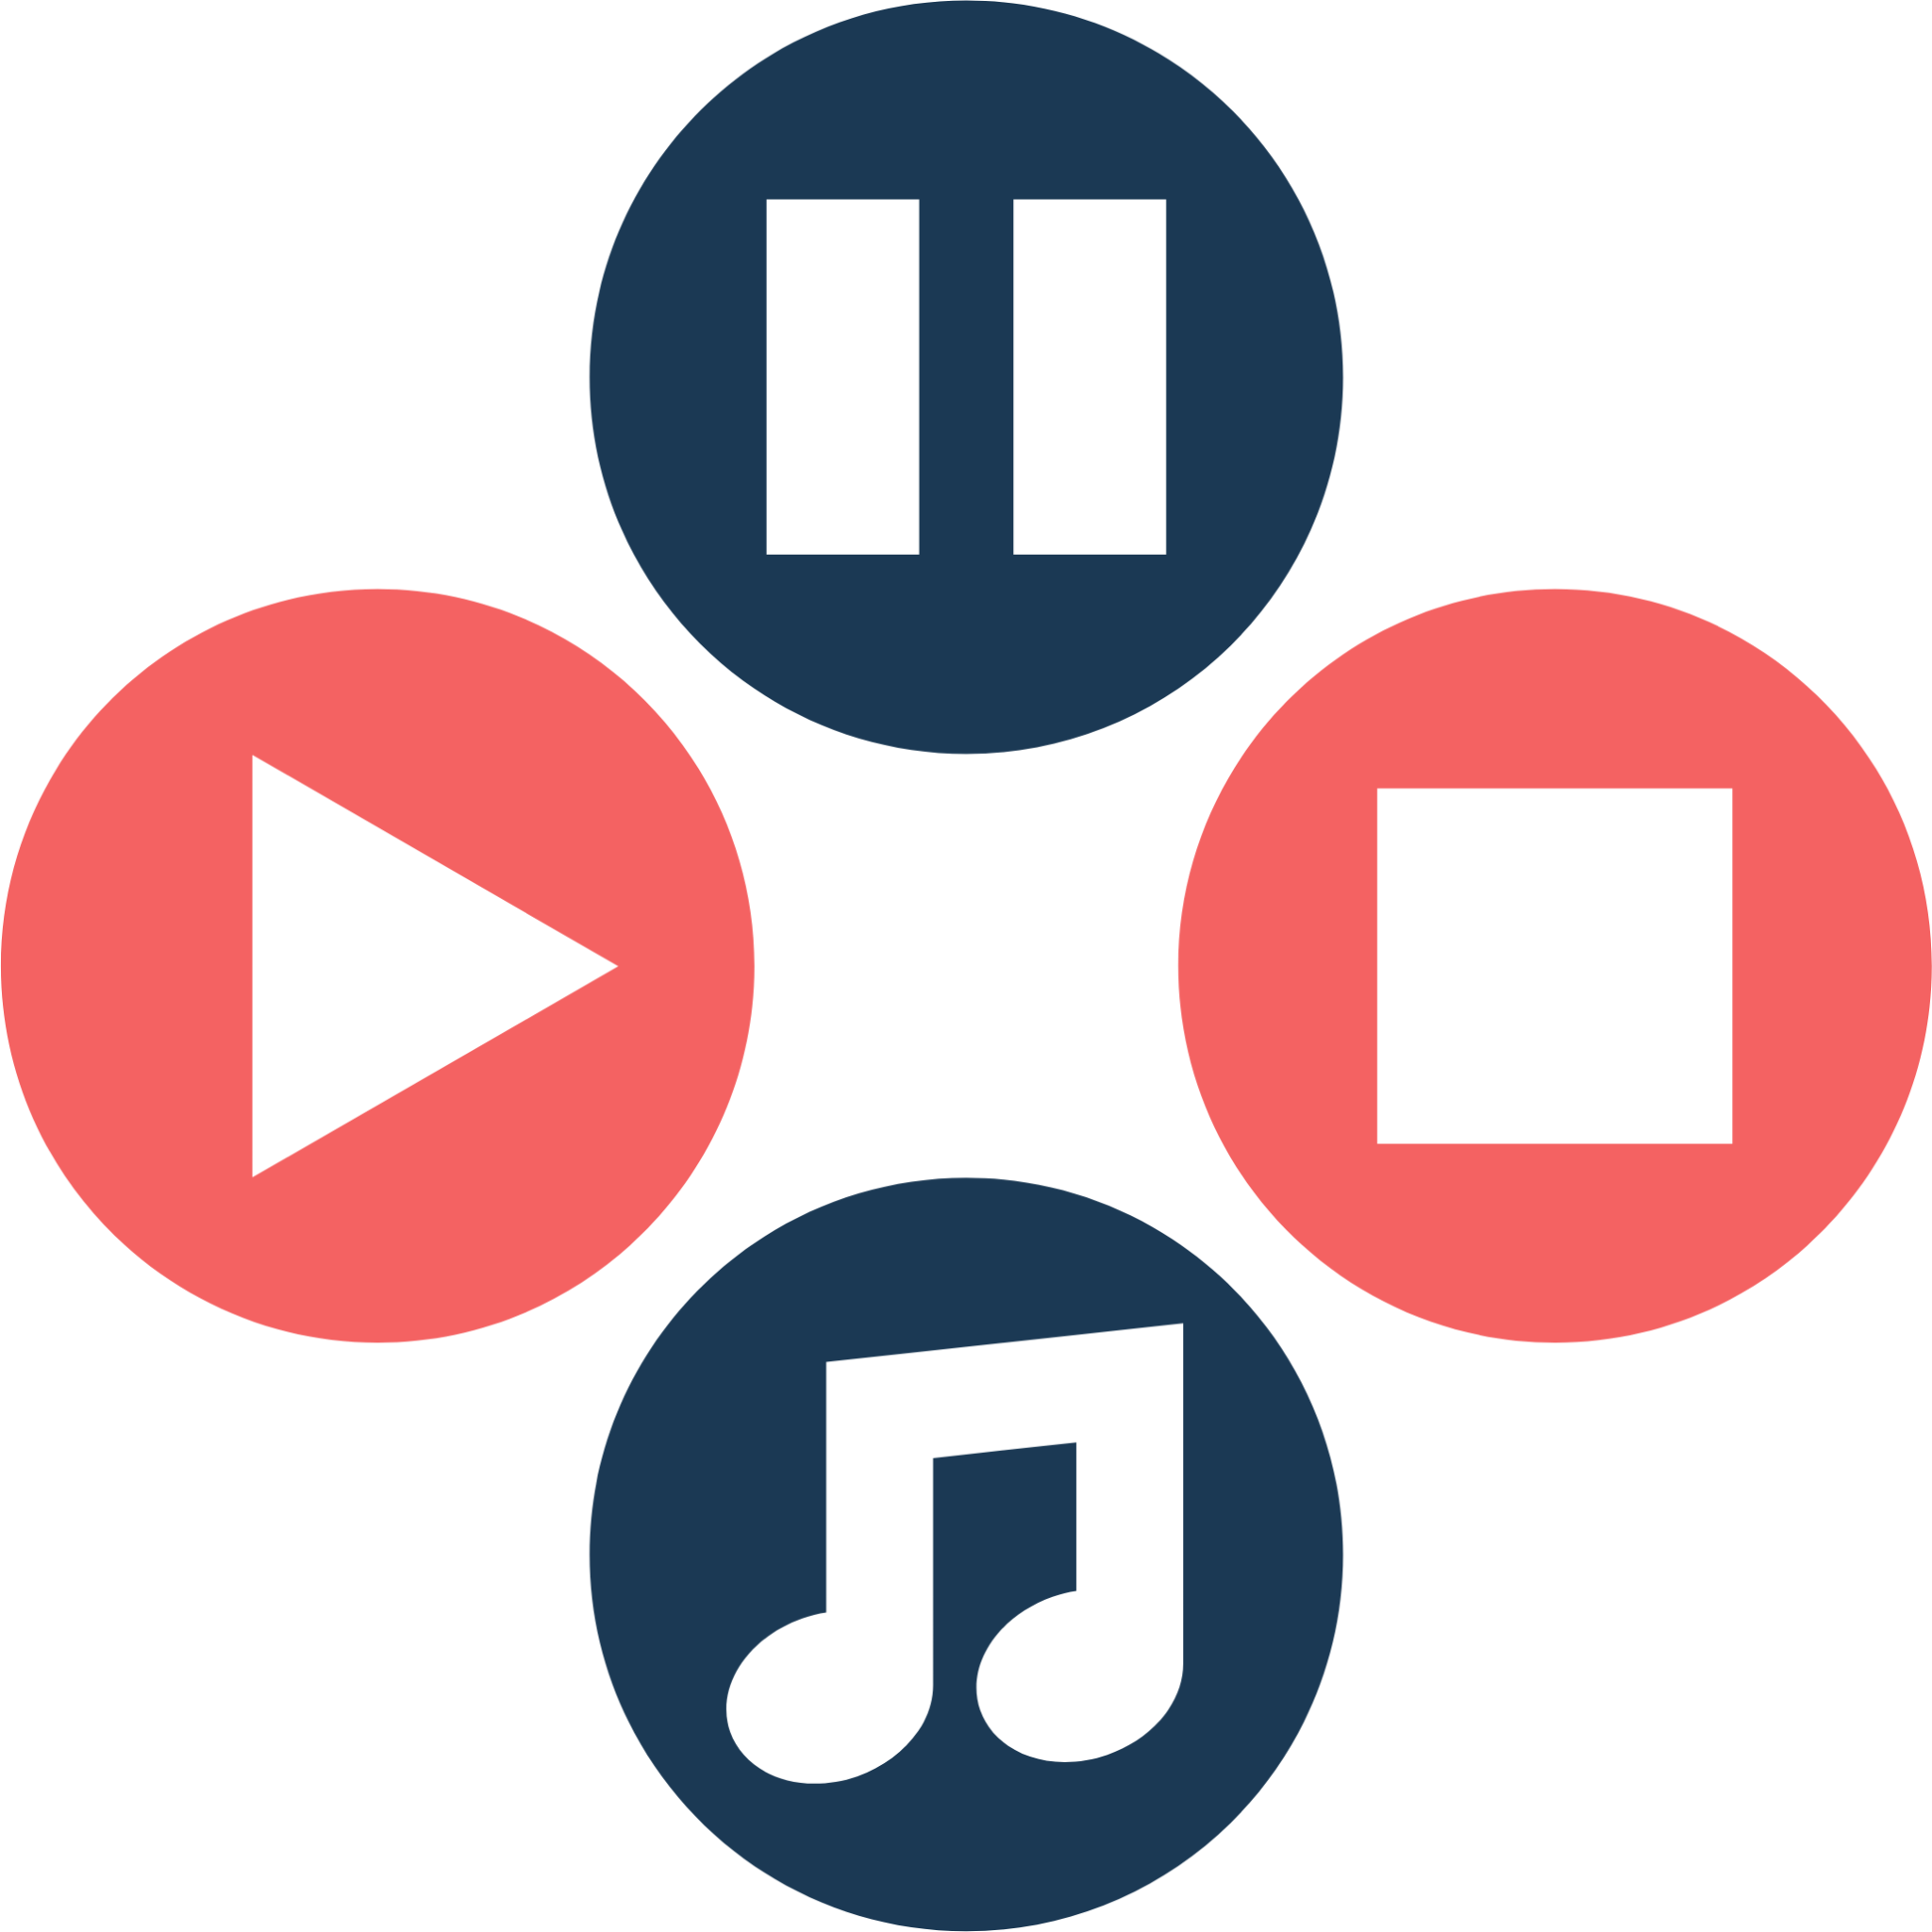 audio melody music buttons 23 icon